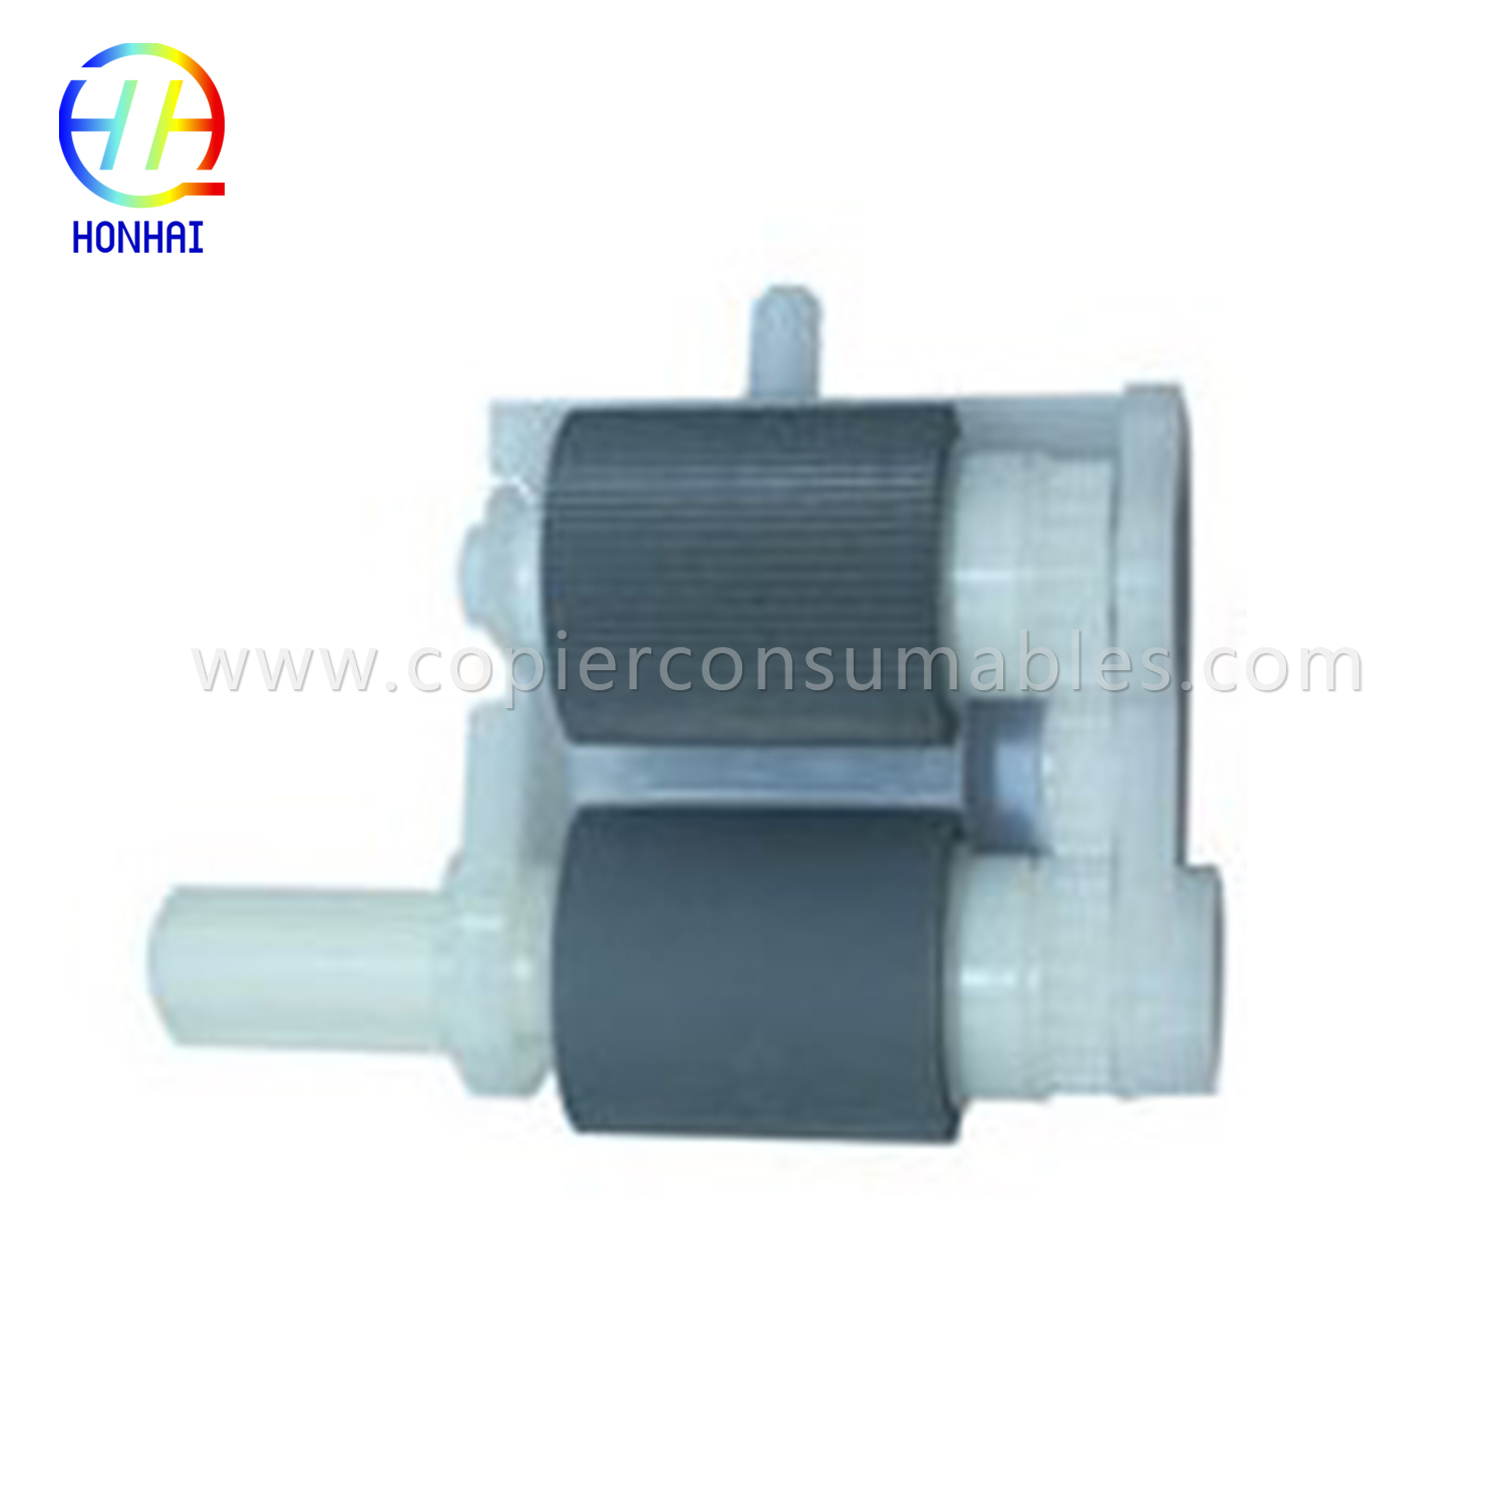 Pickup Roller for Brother DCP2520 2540 2560 2380 7080 7180